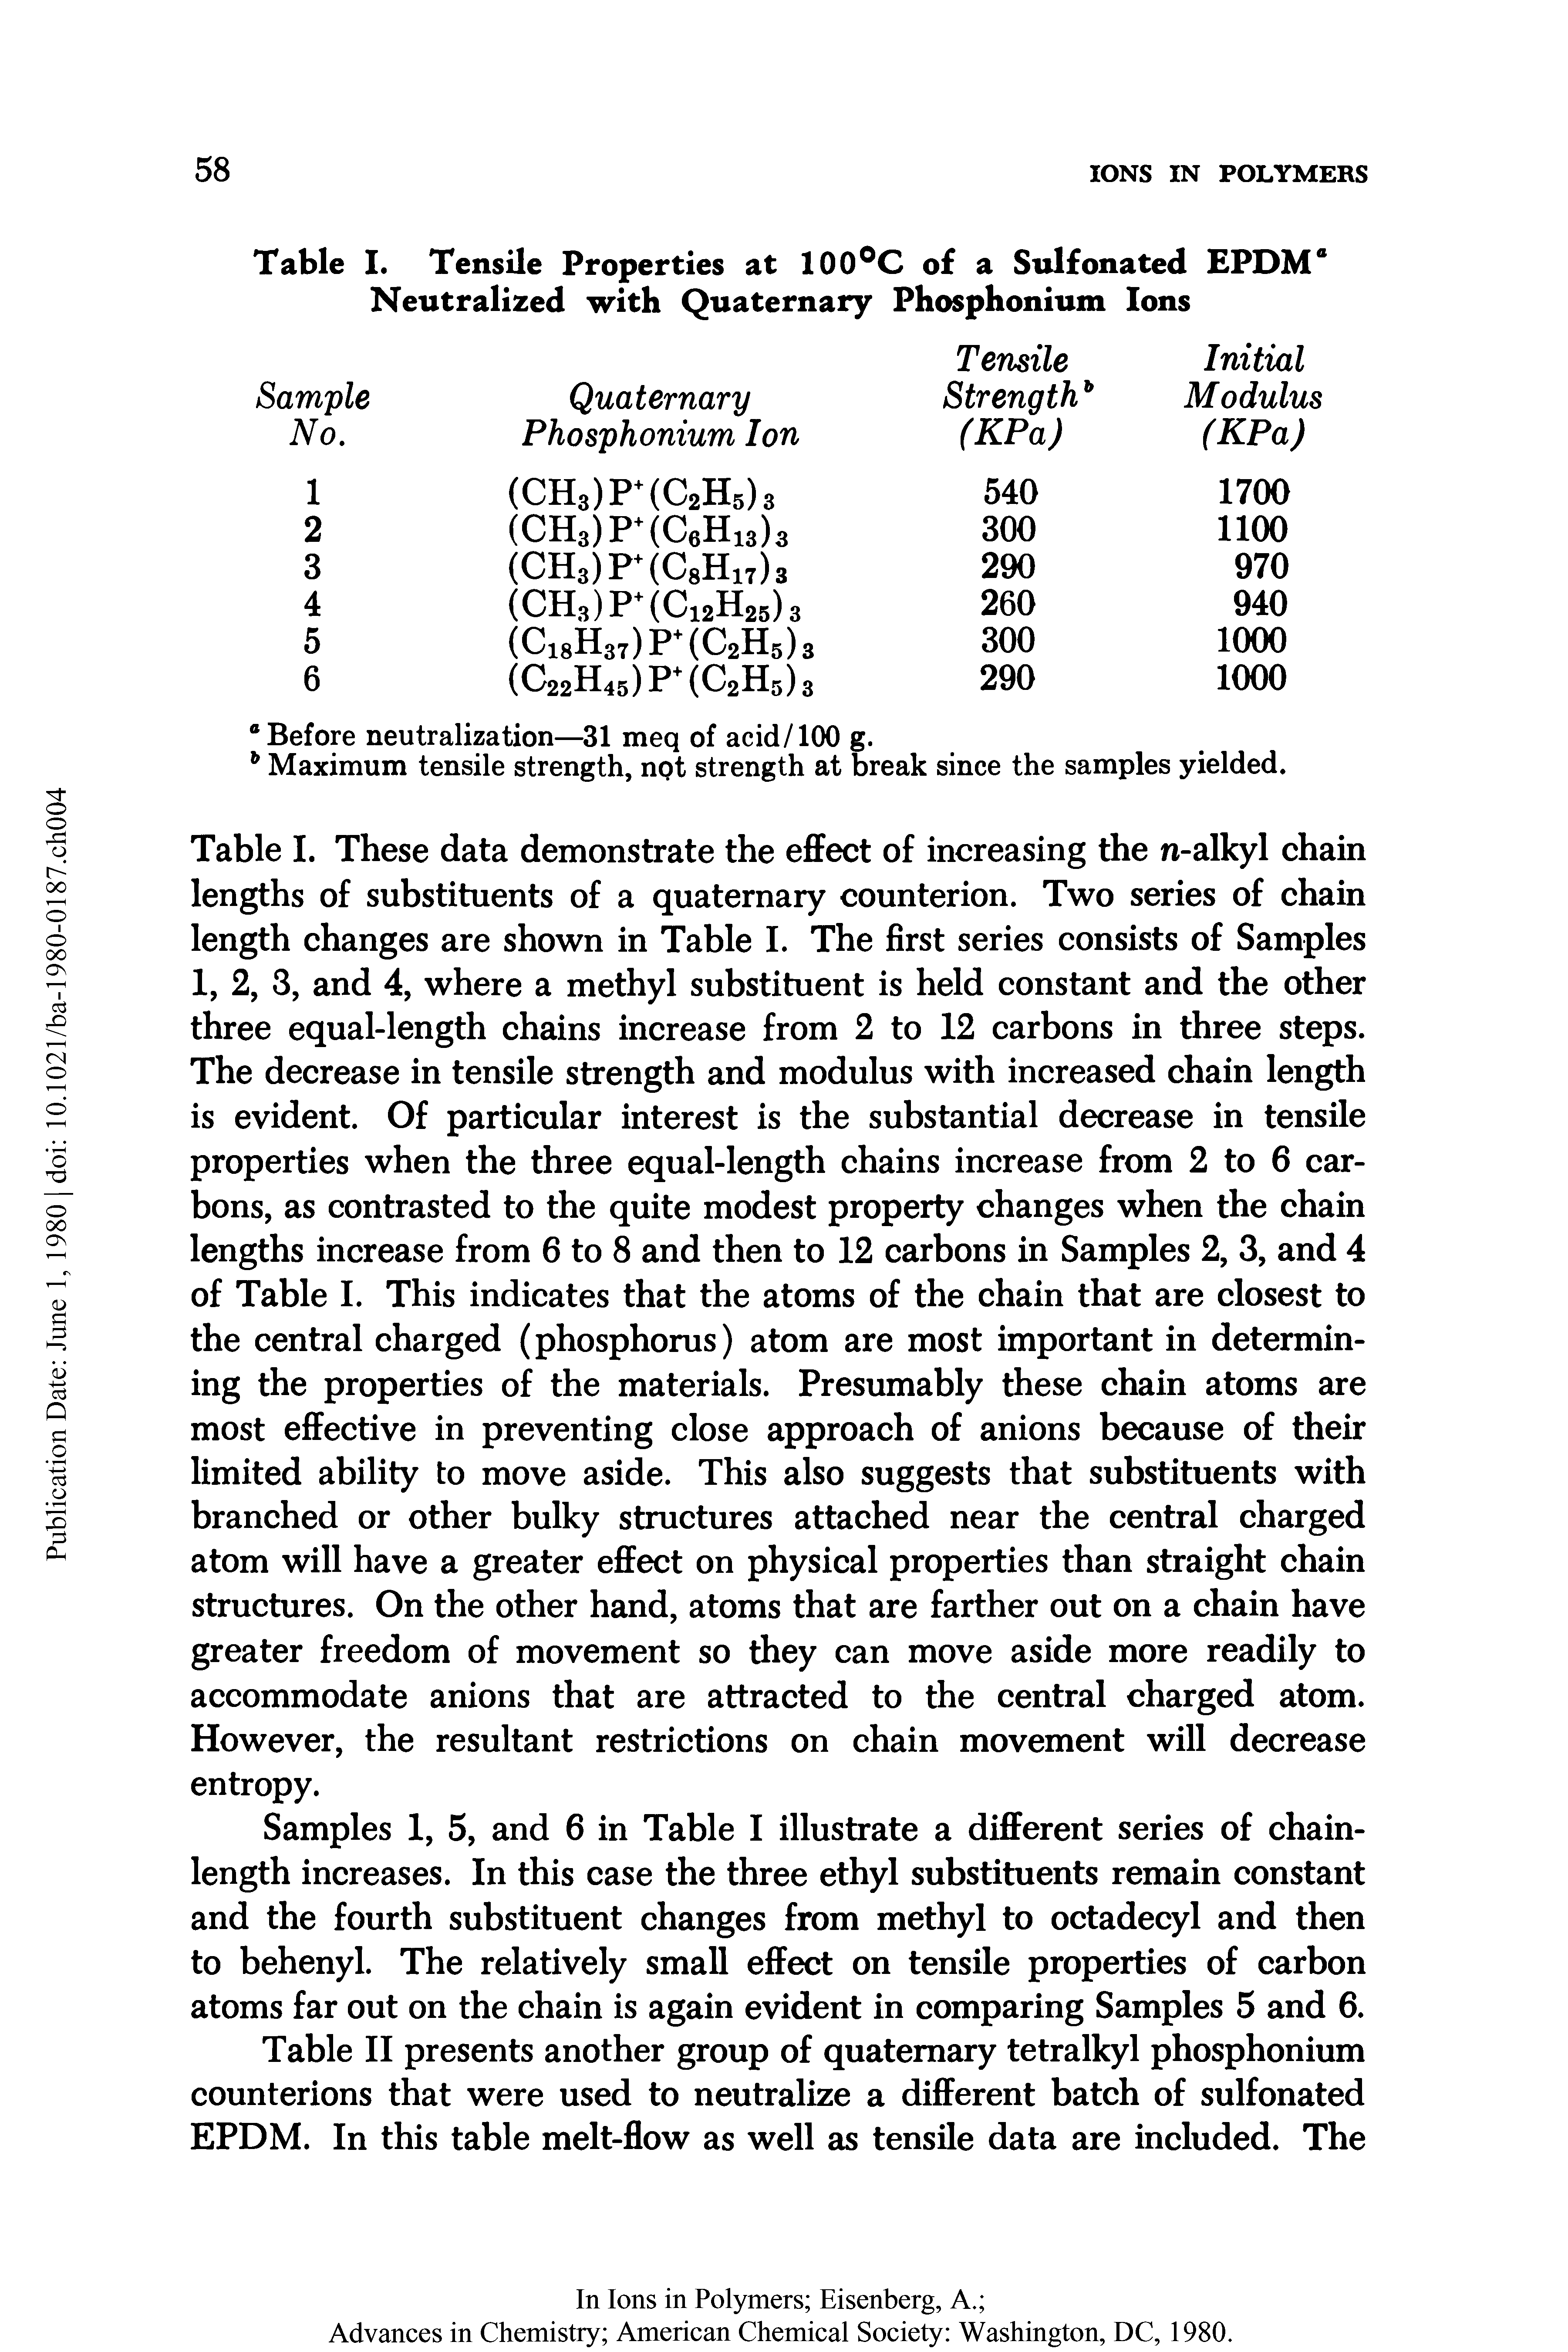 Table I. Tensile Properties at 100°C of a Sulfonated EPDMa Neutralized with Quaternary Phosphonium Ions...